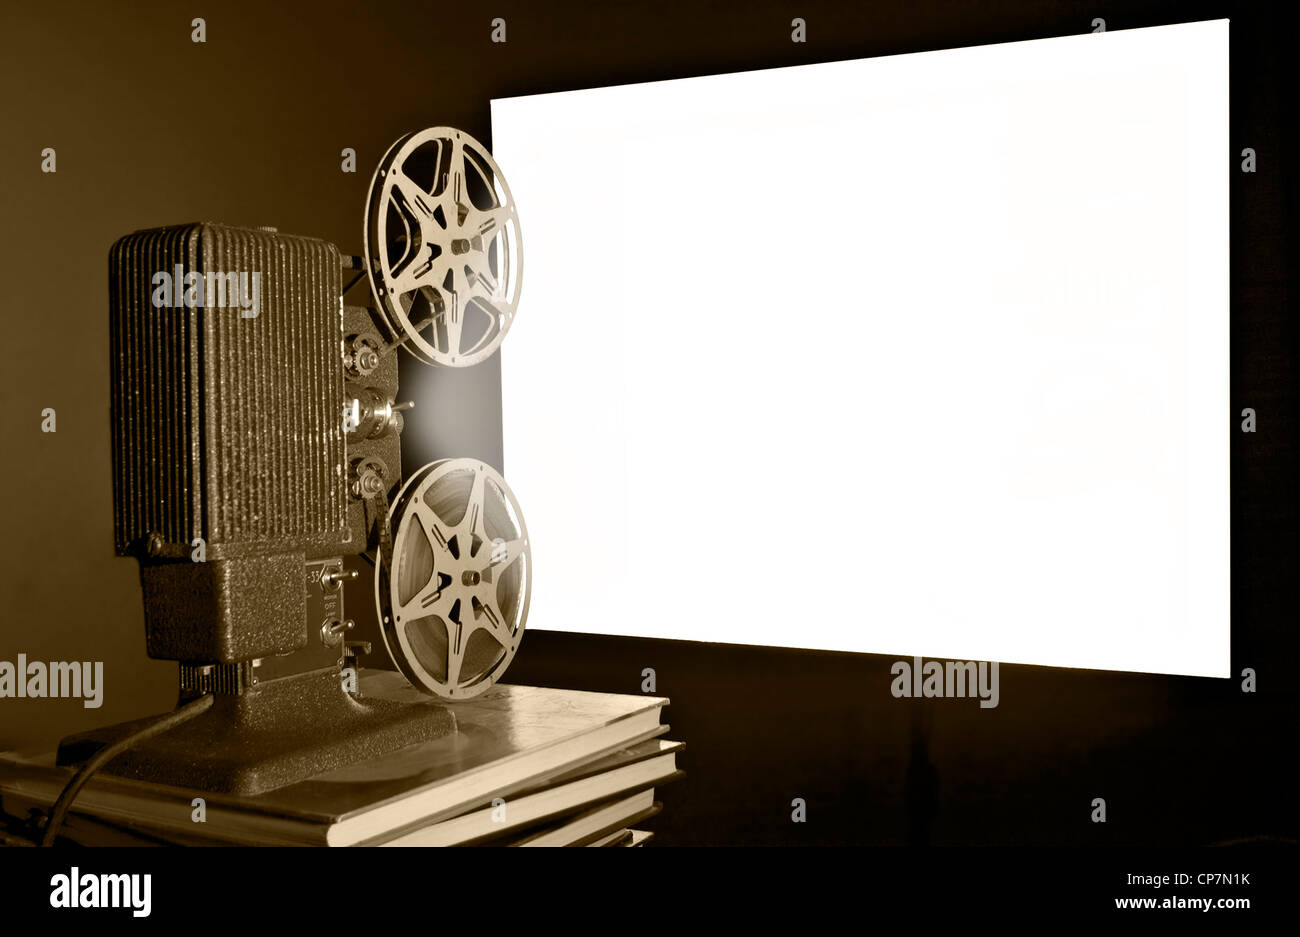 A vintage reel to reel film movie projector shot in a home setting Stock  Photo - Alamy